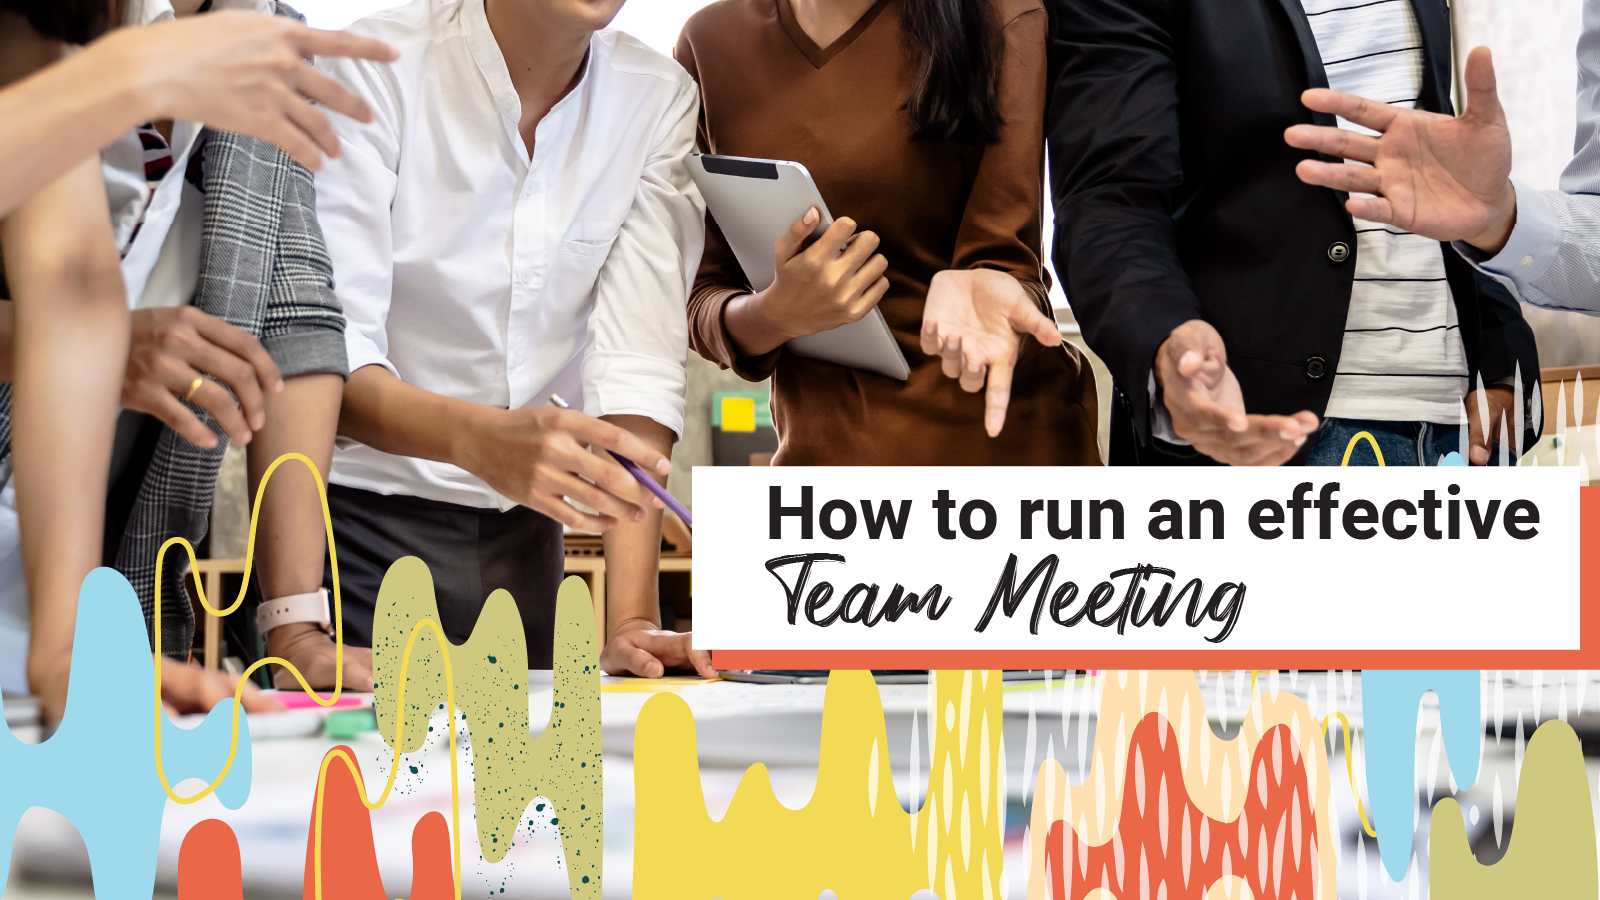 Several office workers discuss agenda items around a table "How to Effectively Run a Team Meeting"